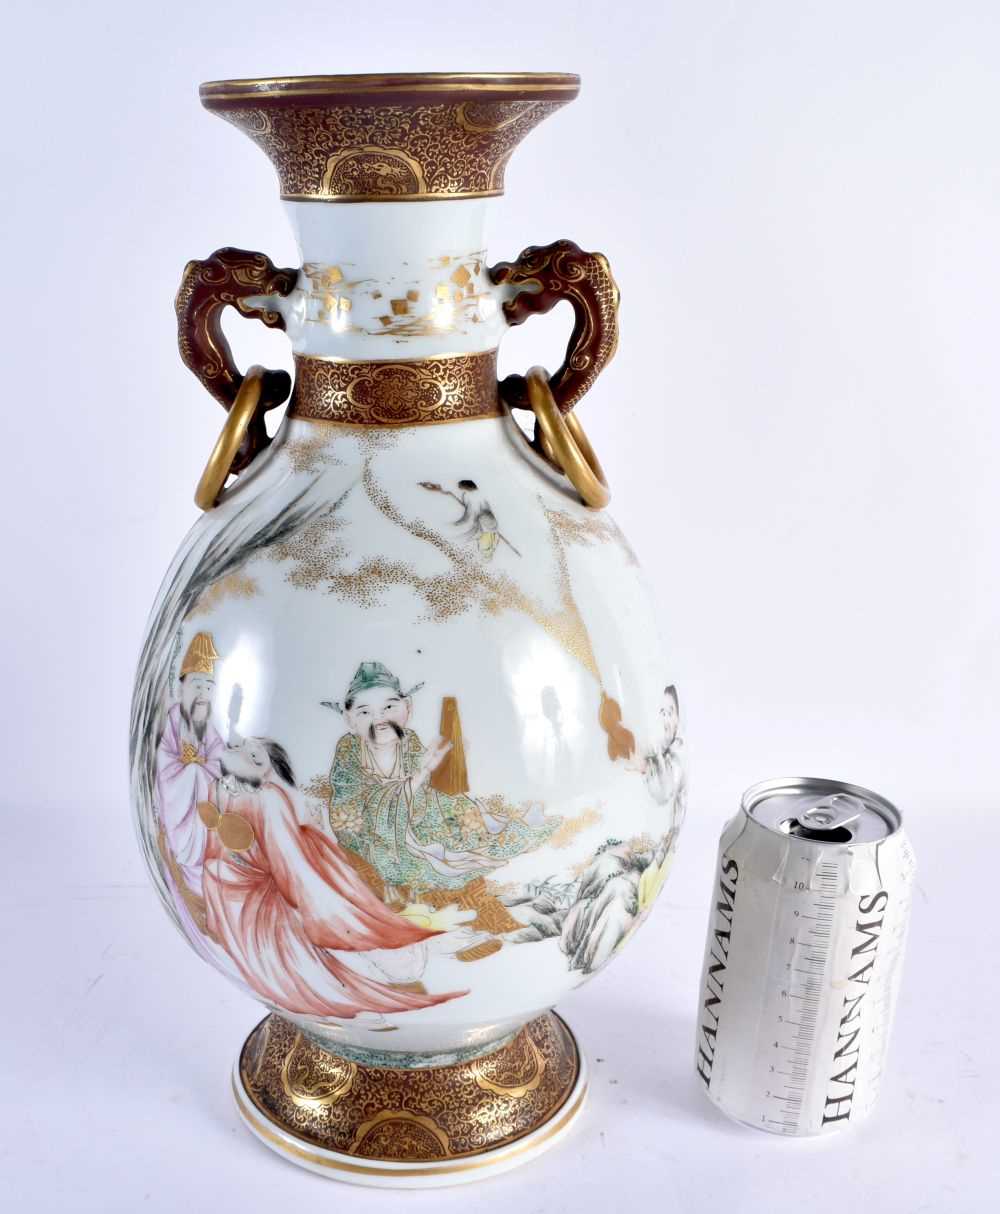 A LARGE 19TH CENTURY JAPANESE MEIJI PERIOD TWIN HANDLED KUTANI PORCELAIN VASE painted with figures